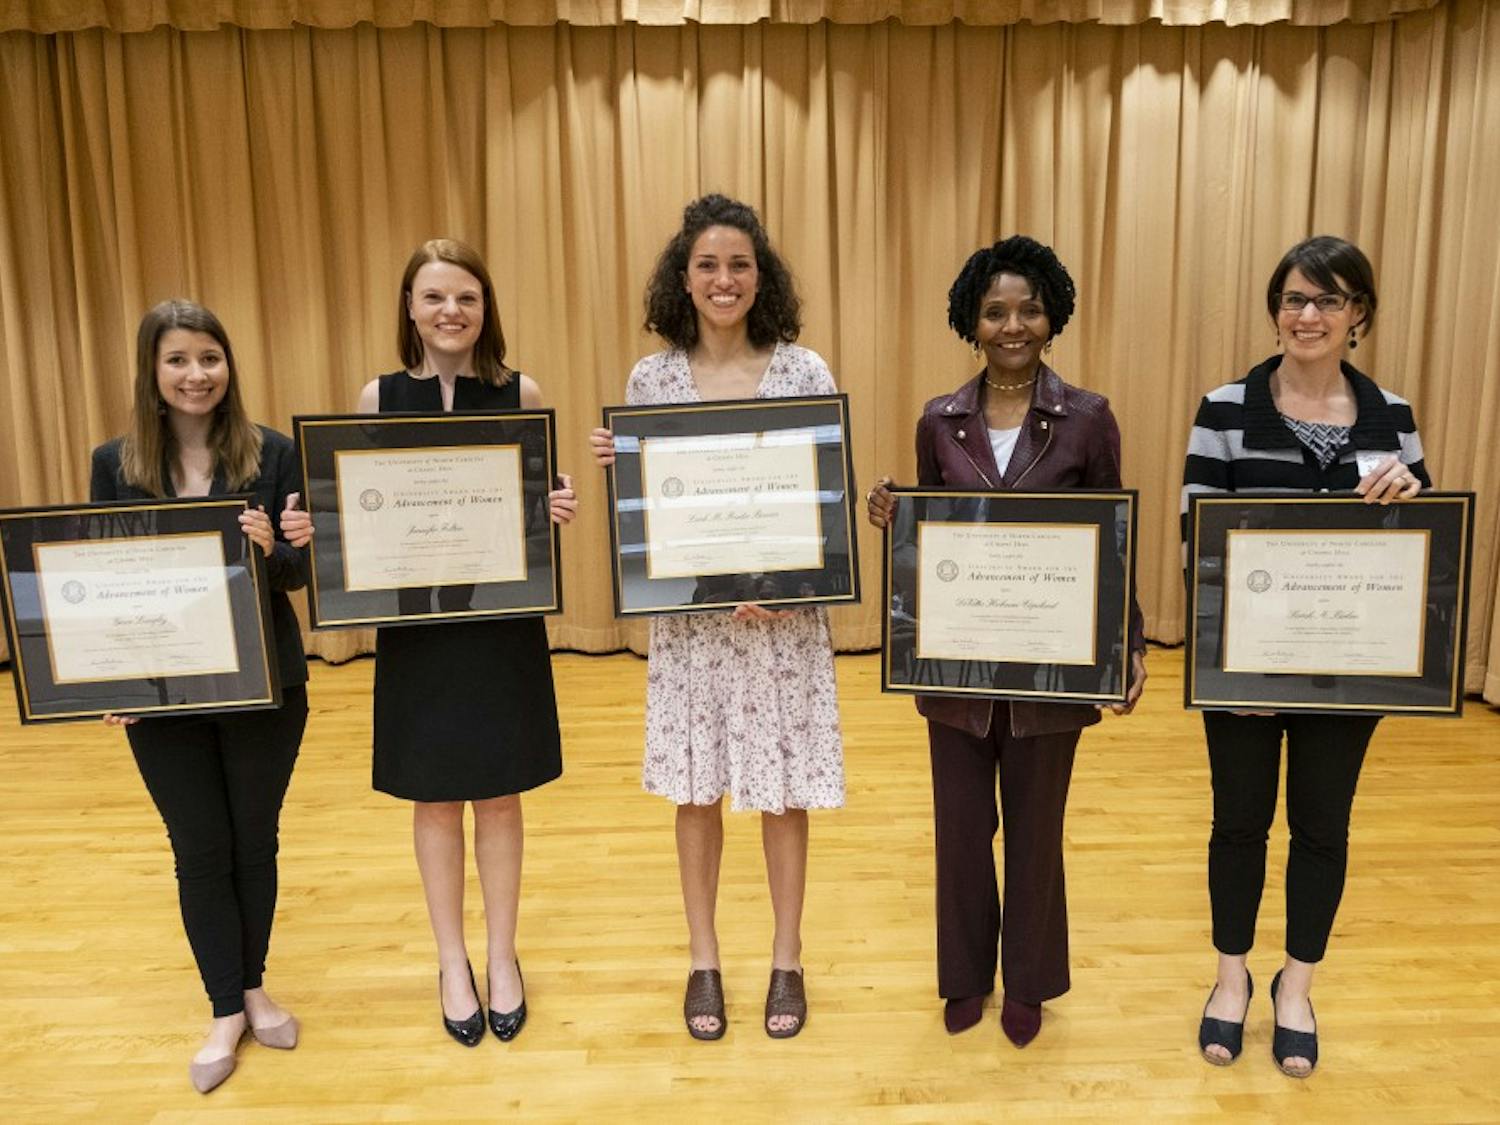 University Awards for the Advancement of Women. Held at the Sonja Haynes Stone Center on the campus of the University of North Carolina at Chapel Hill. March 19, 2019. Photo courtesy of Jon Gardiner/UNC-Chapel Hill.